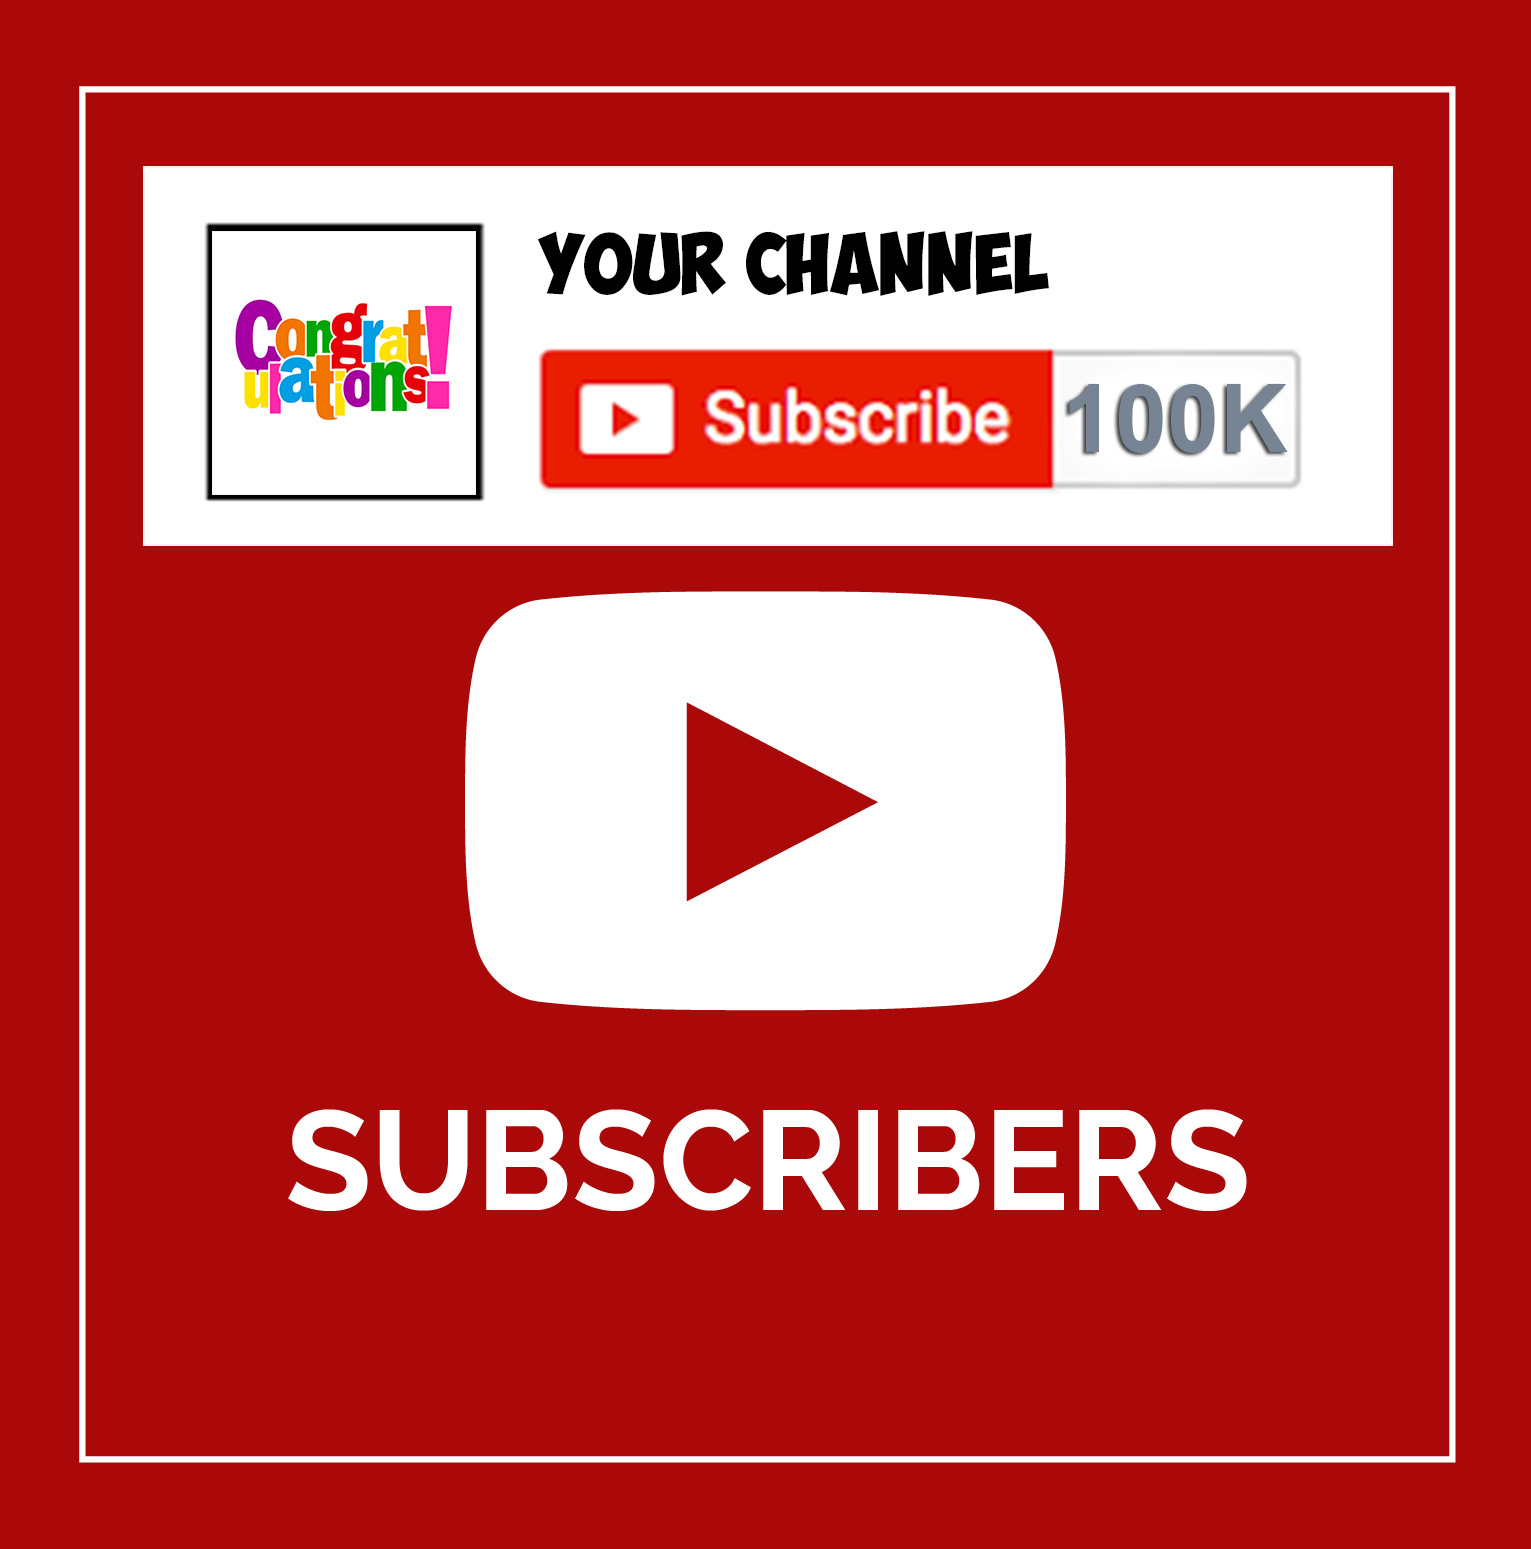 List 90+ Images what do you get for 100k subscribers on youtube Superb